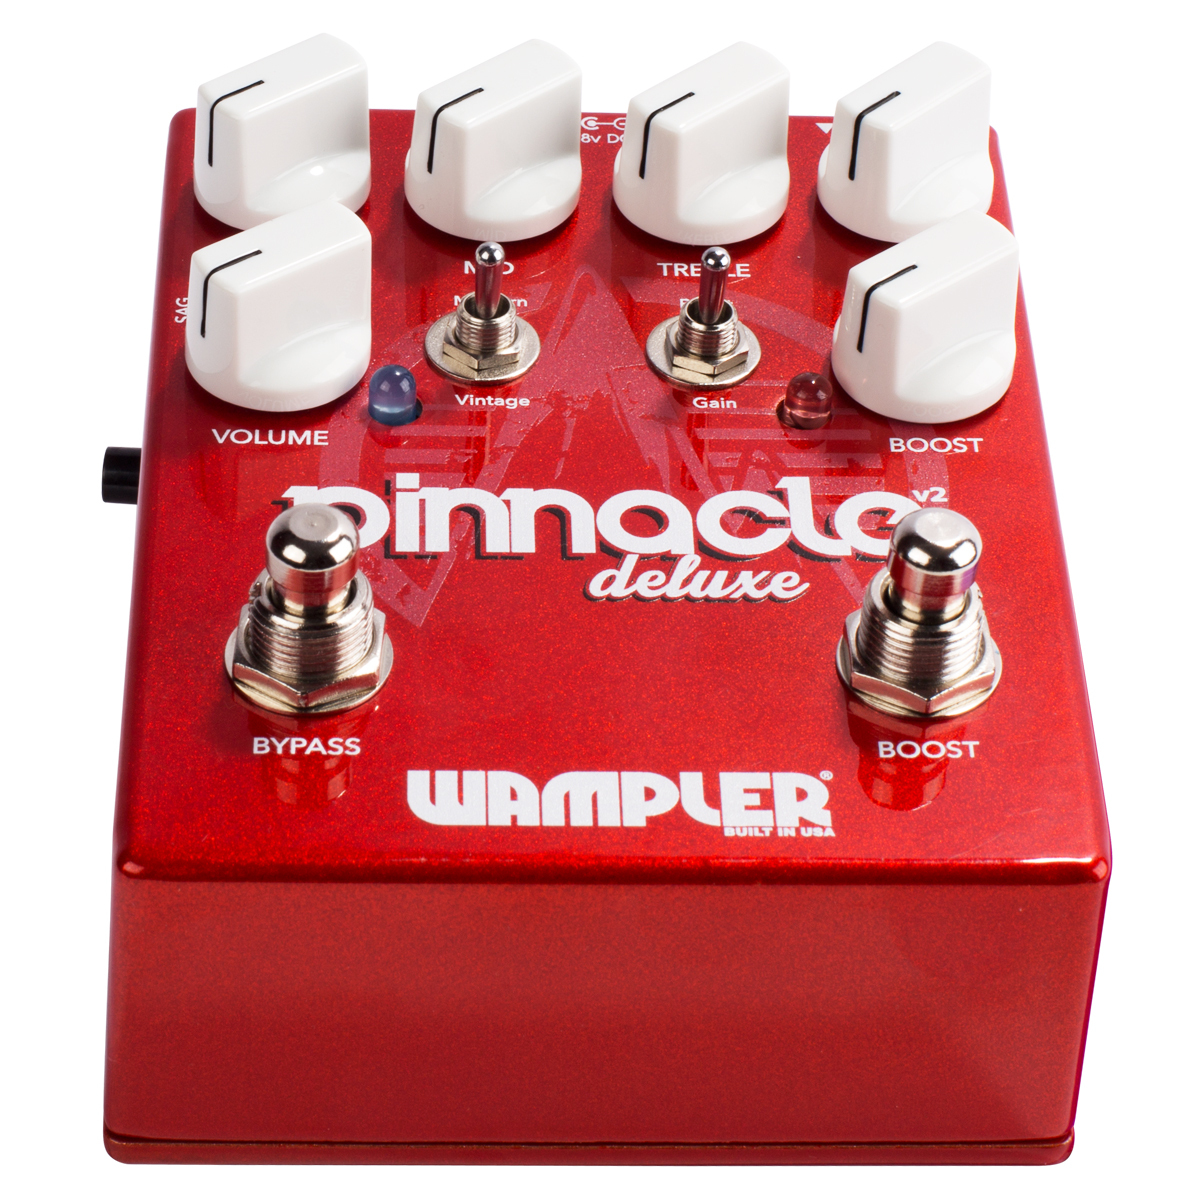 Wampler Pedals Pinnacle Deluxe v2e【オーバードライブ